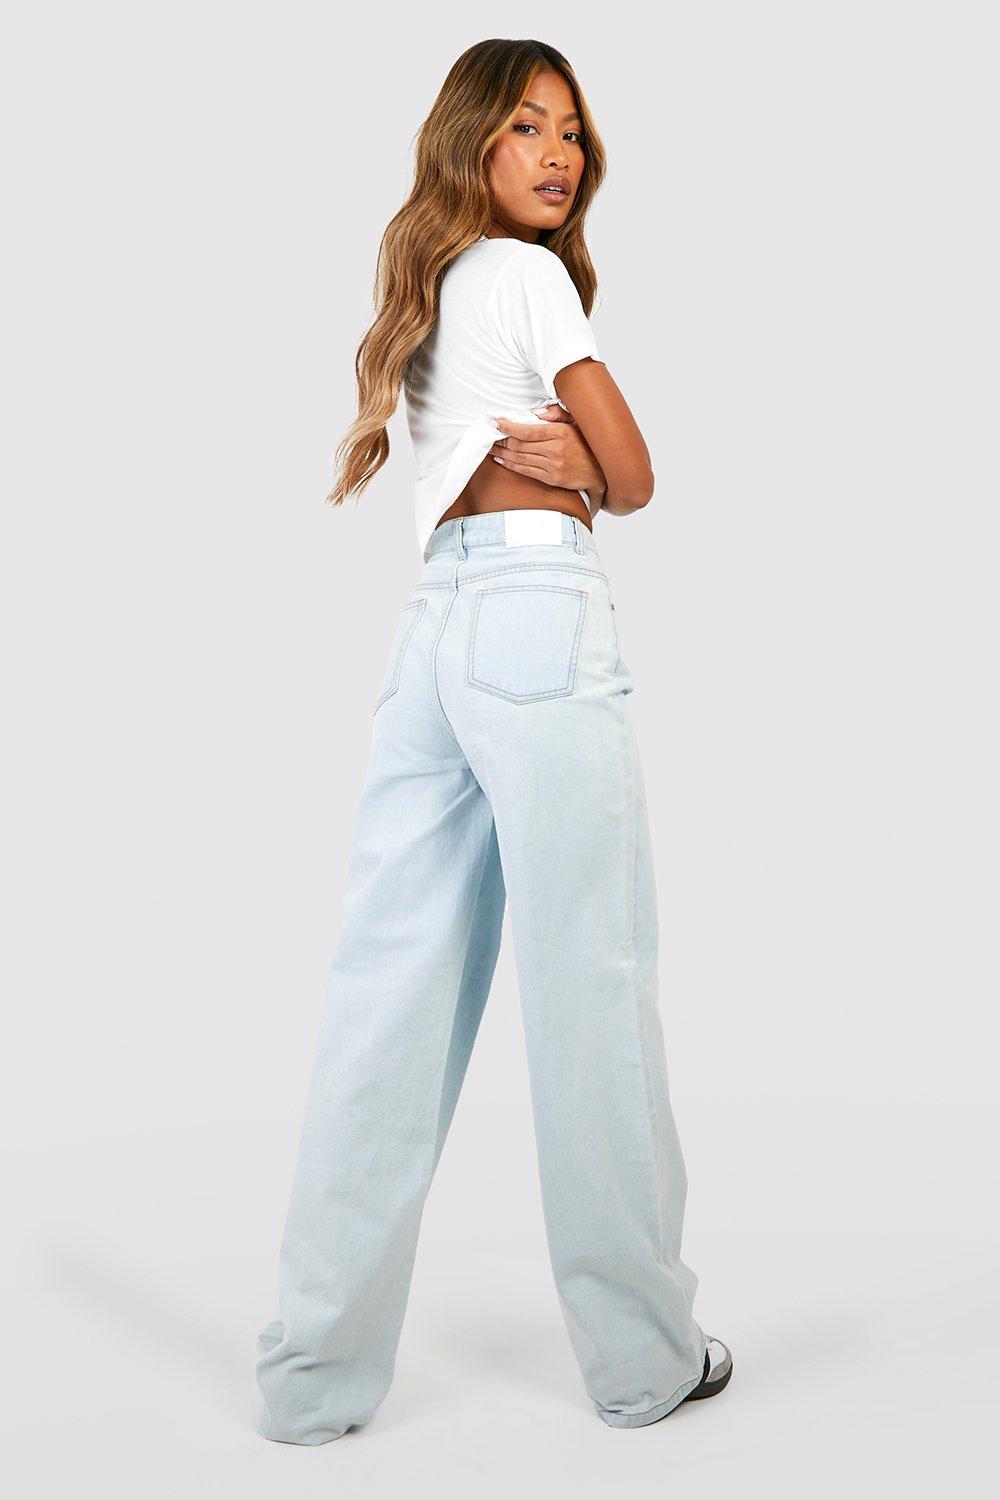  Wide Leg Jeans for Women High Waisted Trendy Stretch